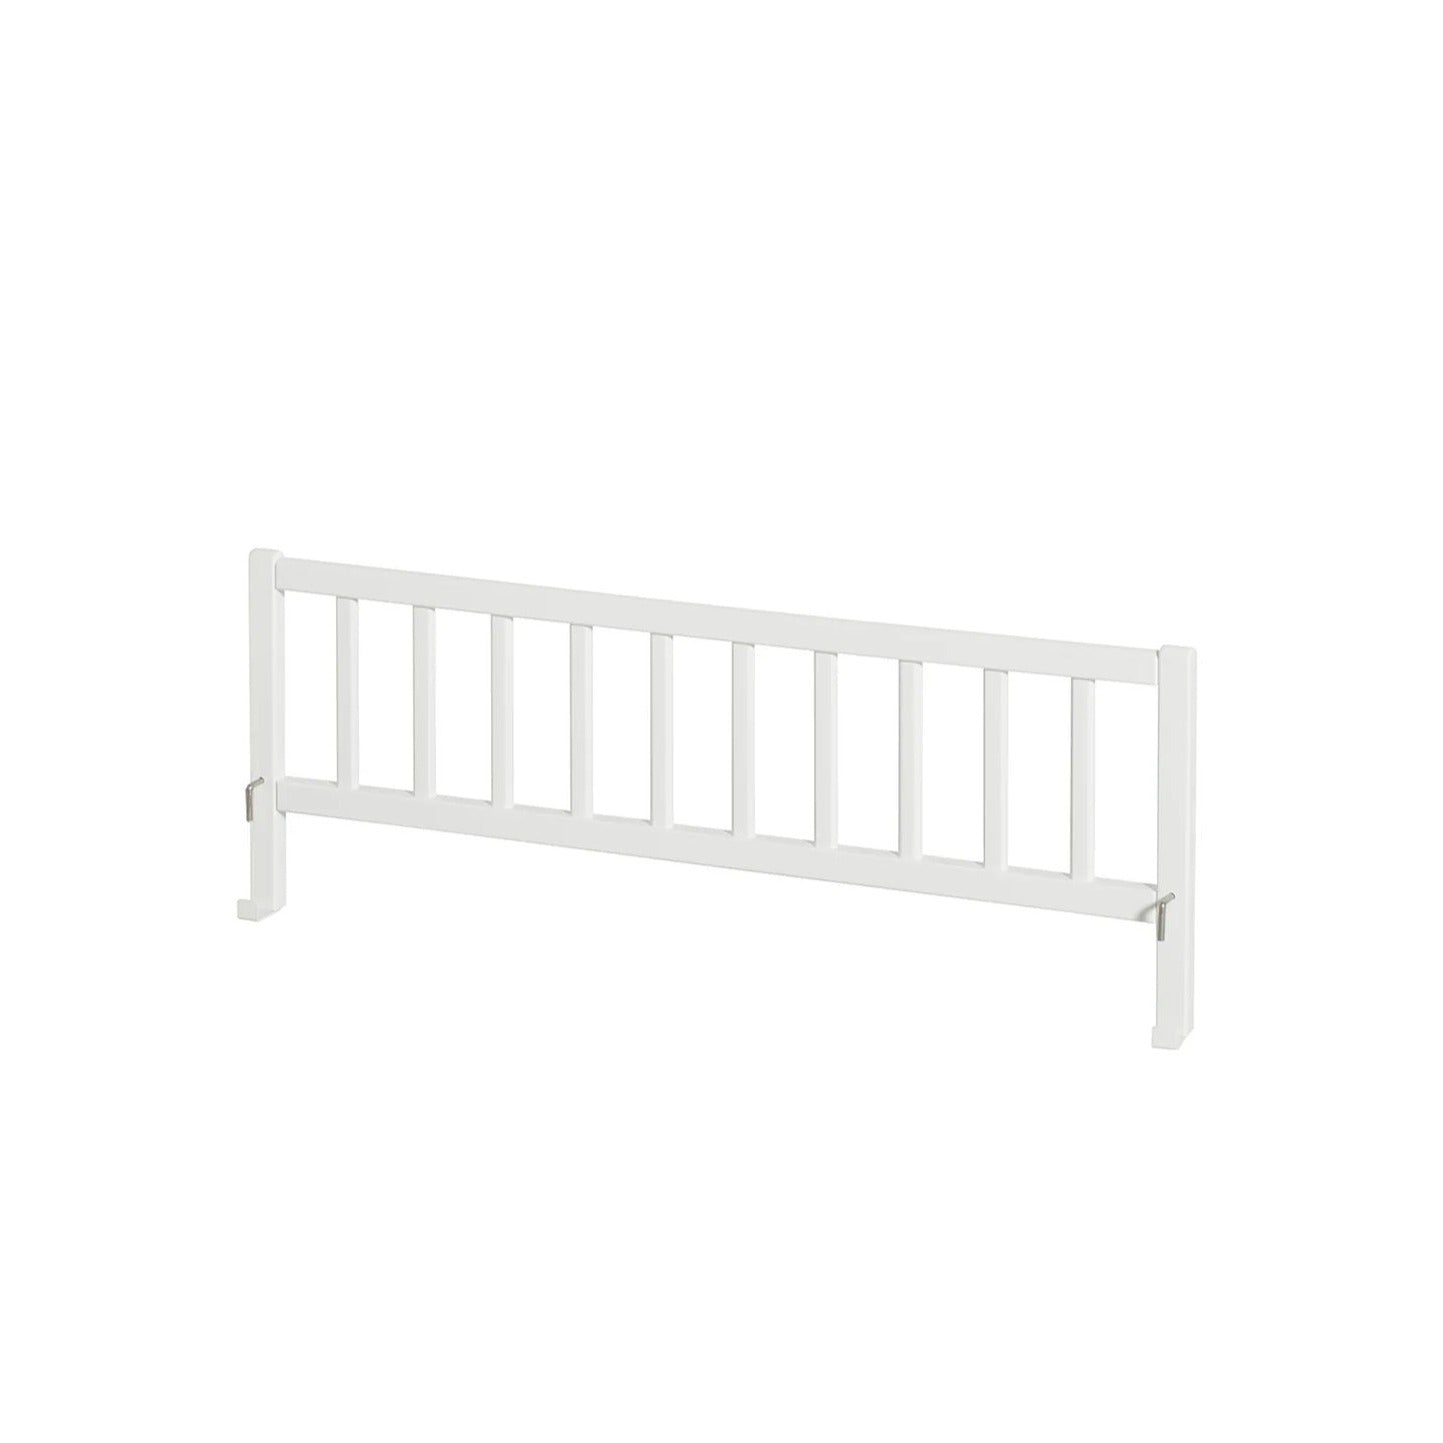 Oliver Furniture Seaside Classic Bunk Bed With Vertical Ladder